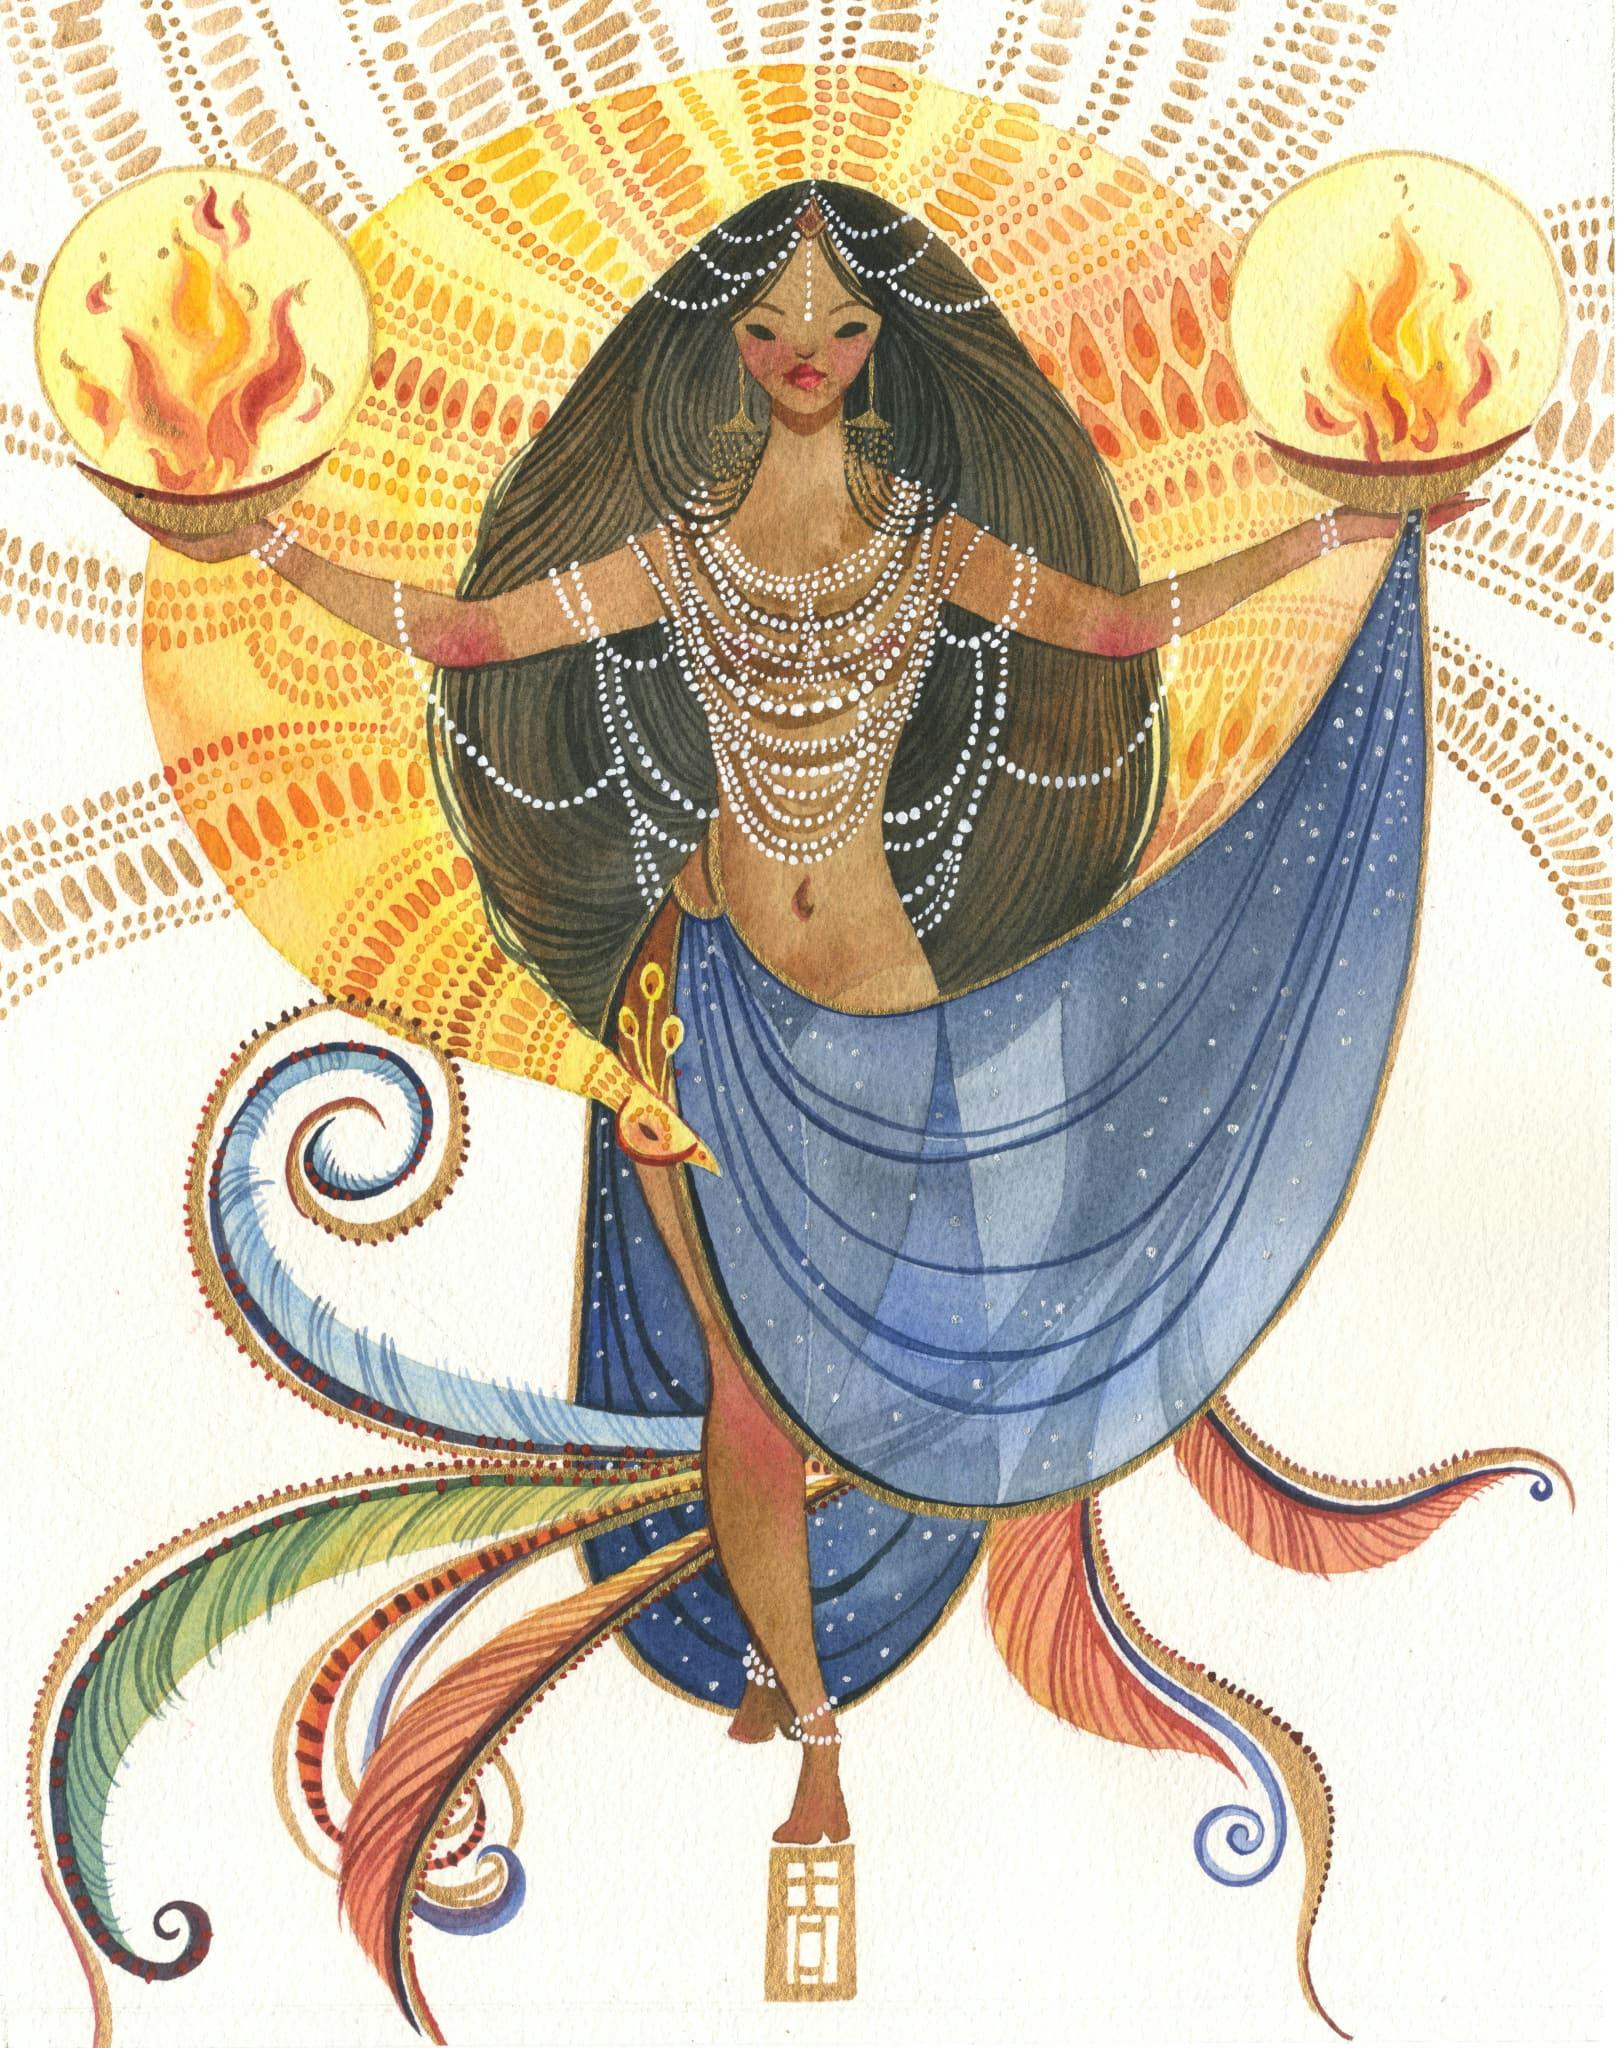 A woman holding two flames